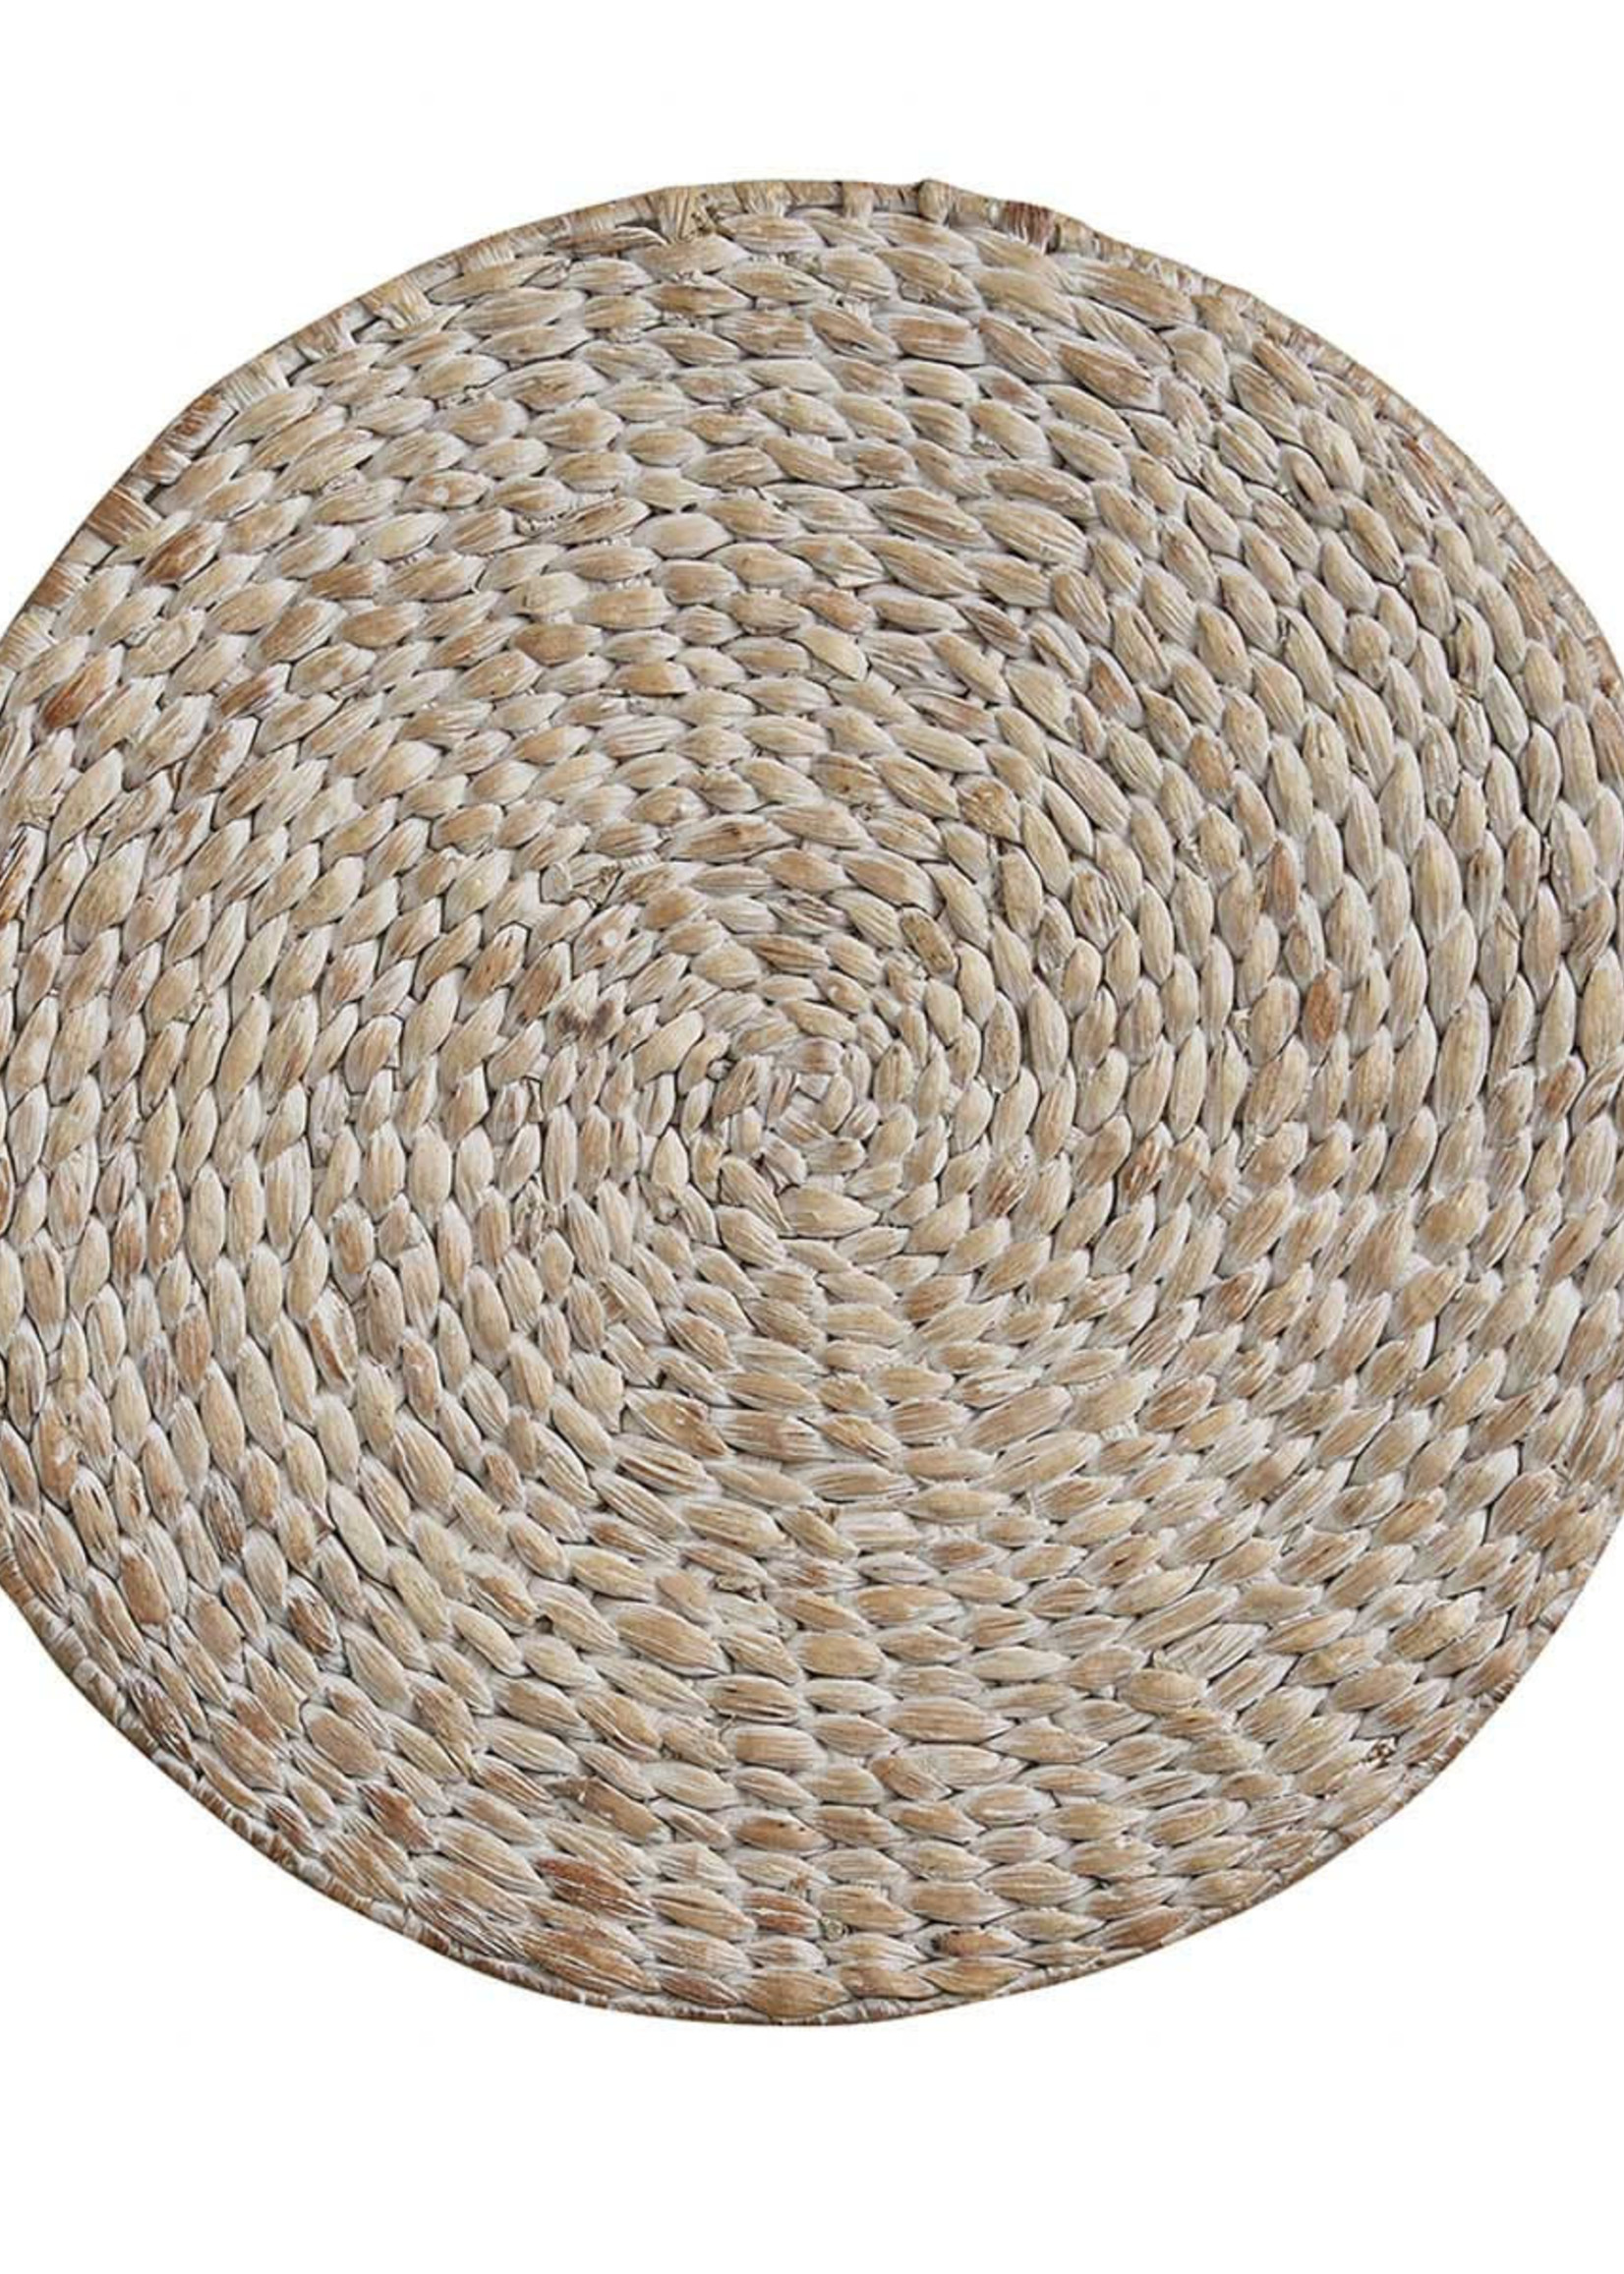 Park Designs Braided Hyacinth Round Placemat White